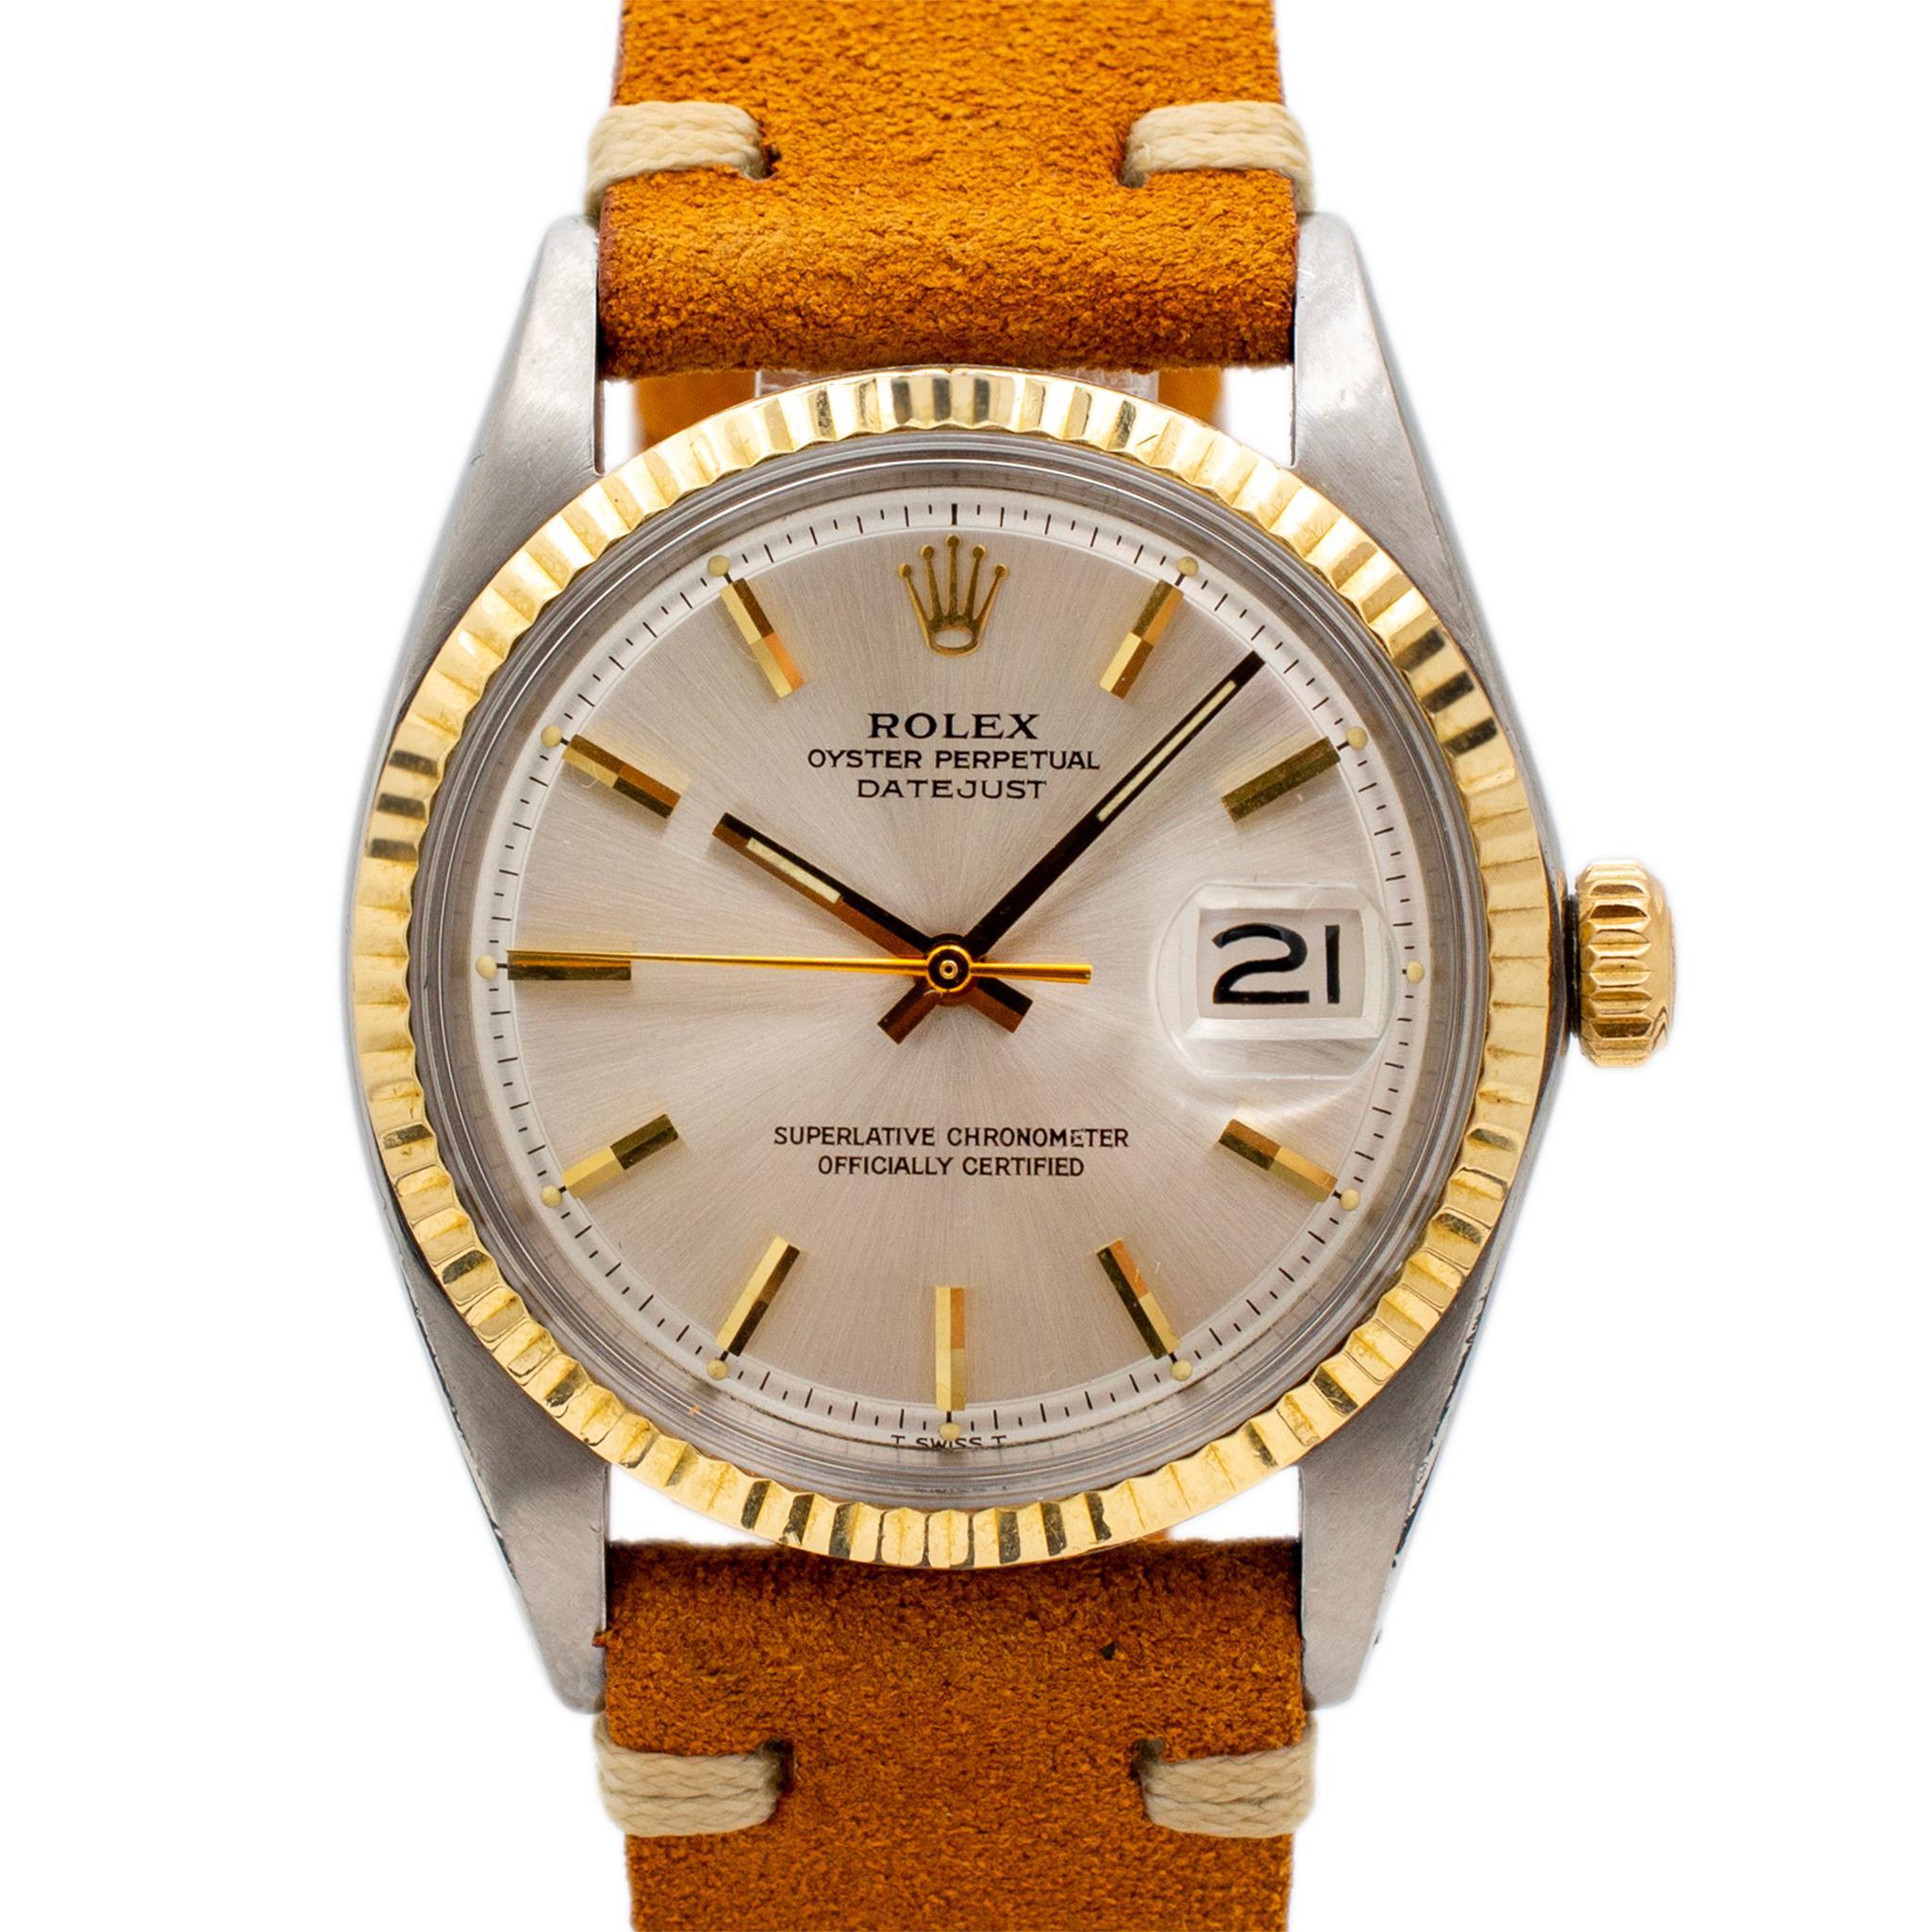 Brand: Rolex

Gender: Unisex

Metal Type: 14K Yellow Gold & Stainless Steel

Diameter: 36.00 mm

Weight: 56.36 Grams

14K yellow gold and stainless steel ROLEX Swiss made watch. The metals were tested and determined to be 14K yellow gold and